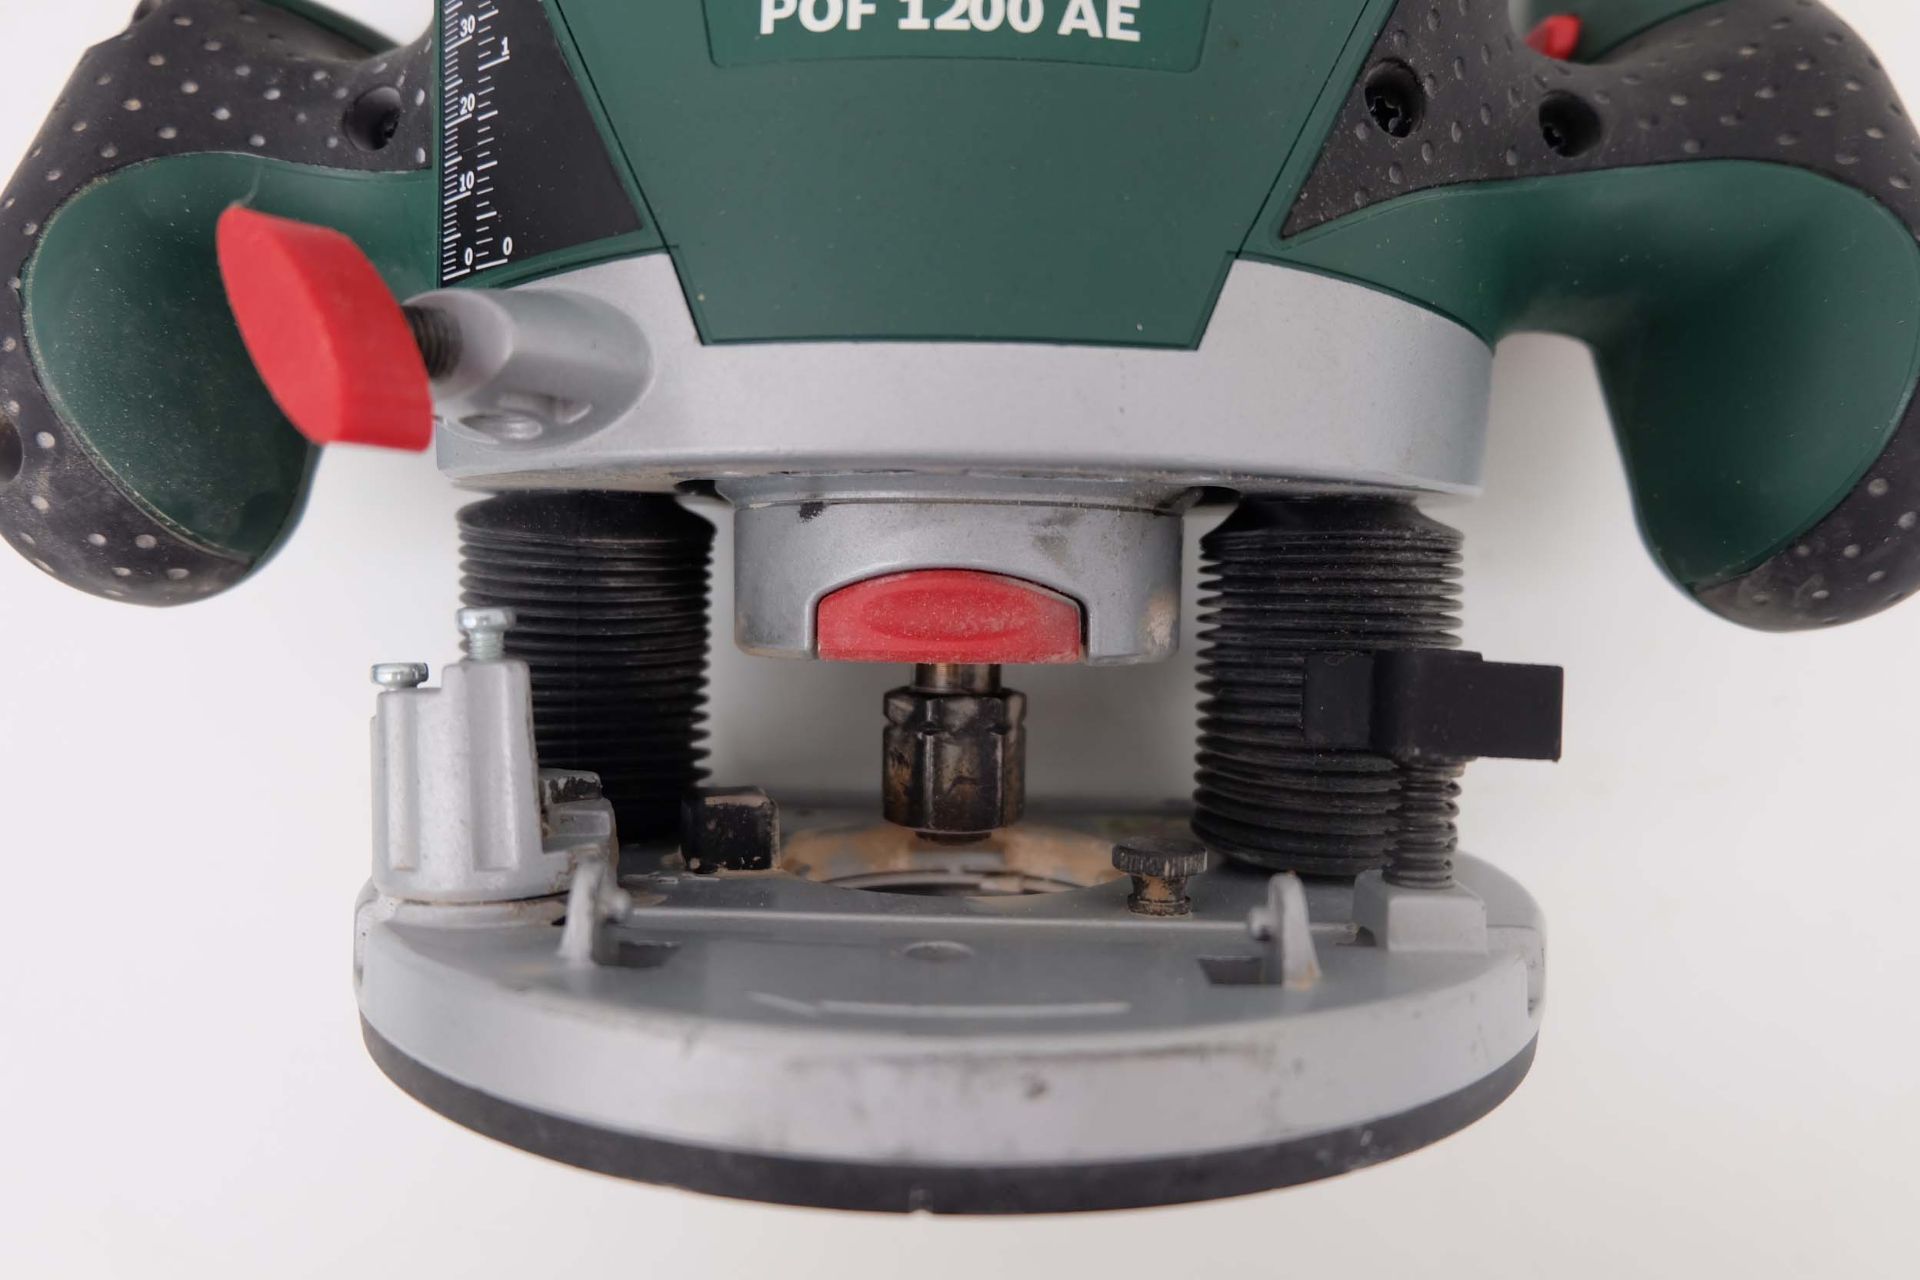 Bosch POF1200AE Electronic Plunging Router. 230V,1200W Motor. With Box of Bits. - Image 5 of 9